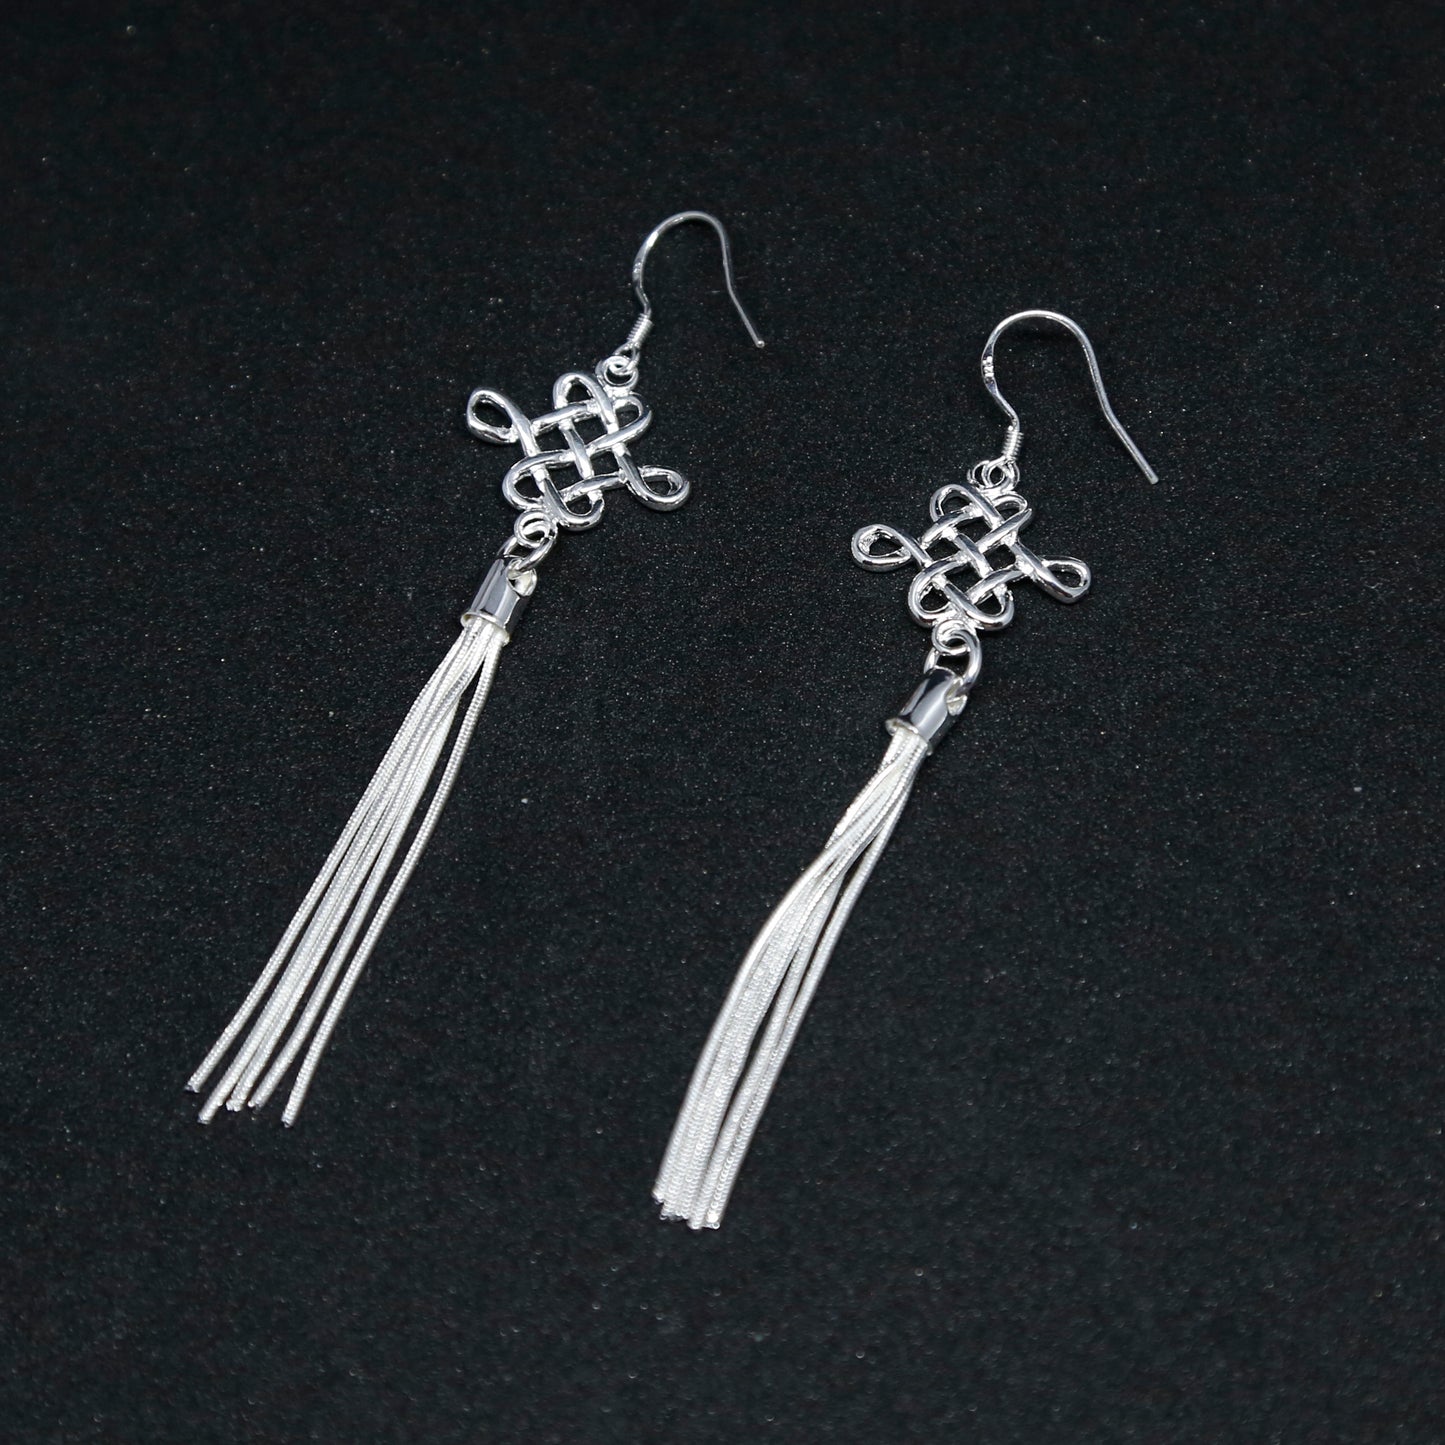 Chinese Lucky Knot Boho Chic Dangle and Drop Silver Earrings - ZentralDesigns